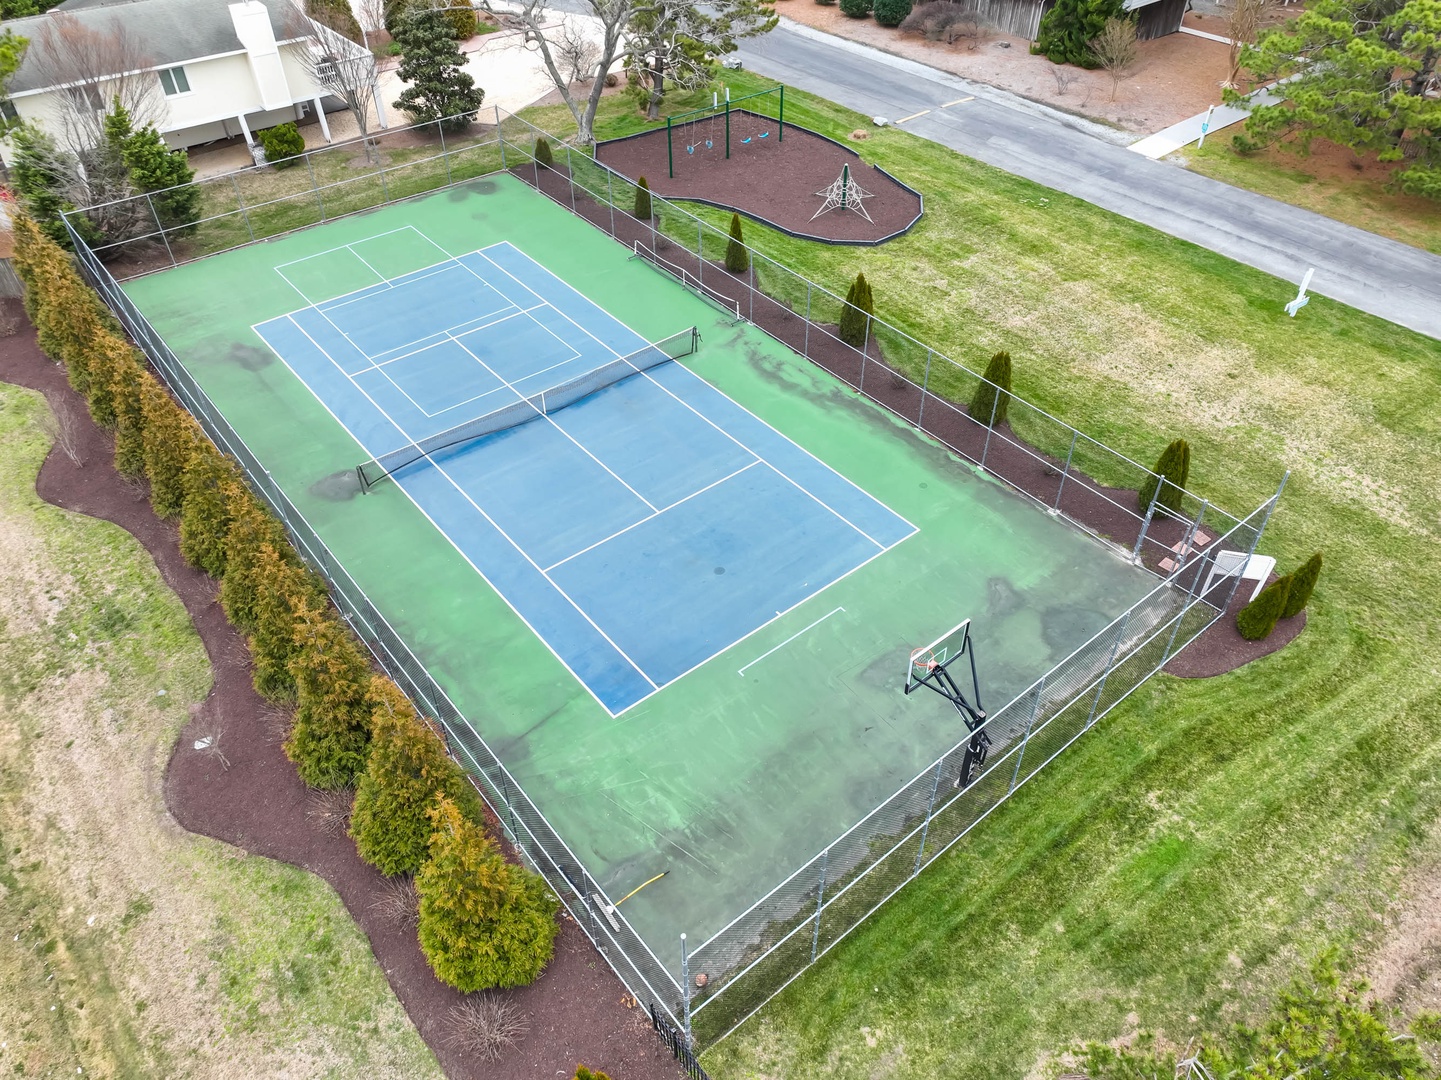 Bust out the rackets and hit the community Tennis Court between beach visits